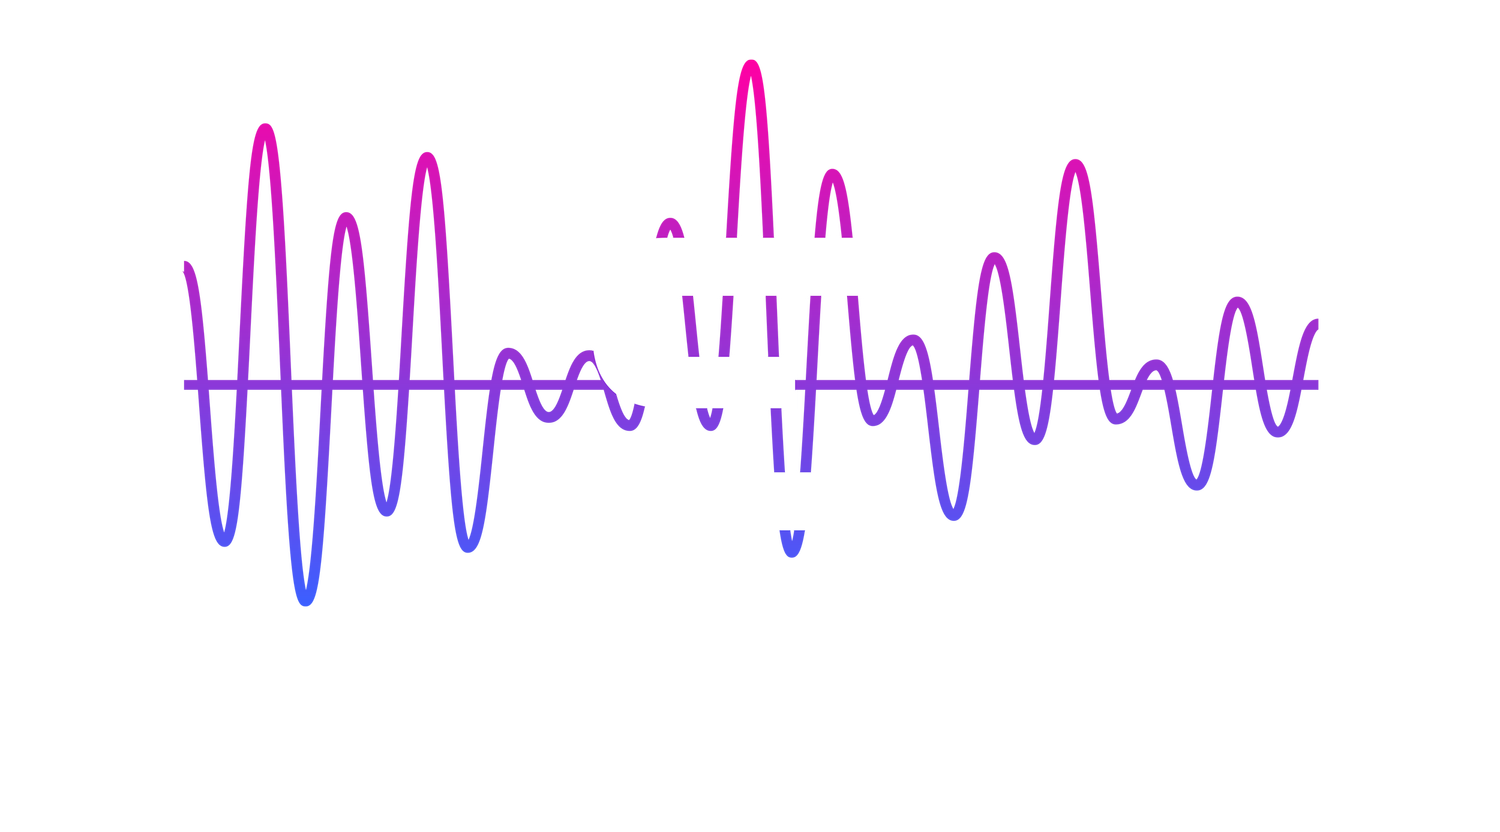 S1gns Of L1fe